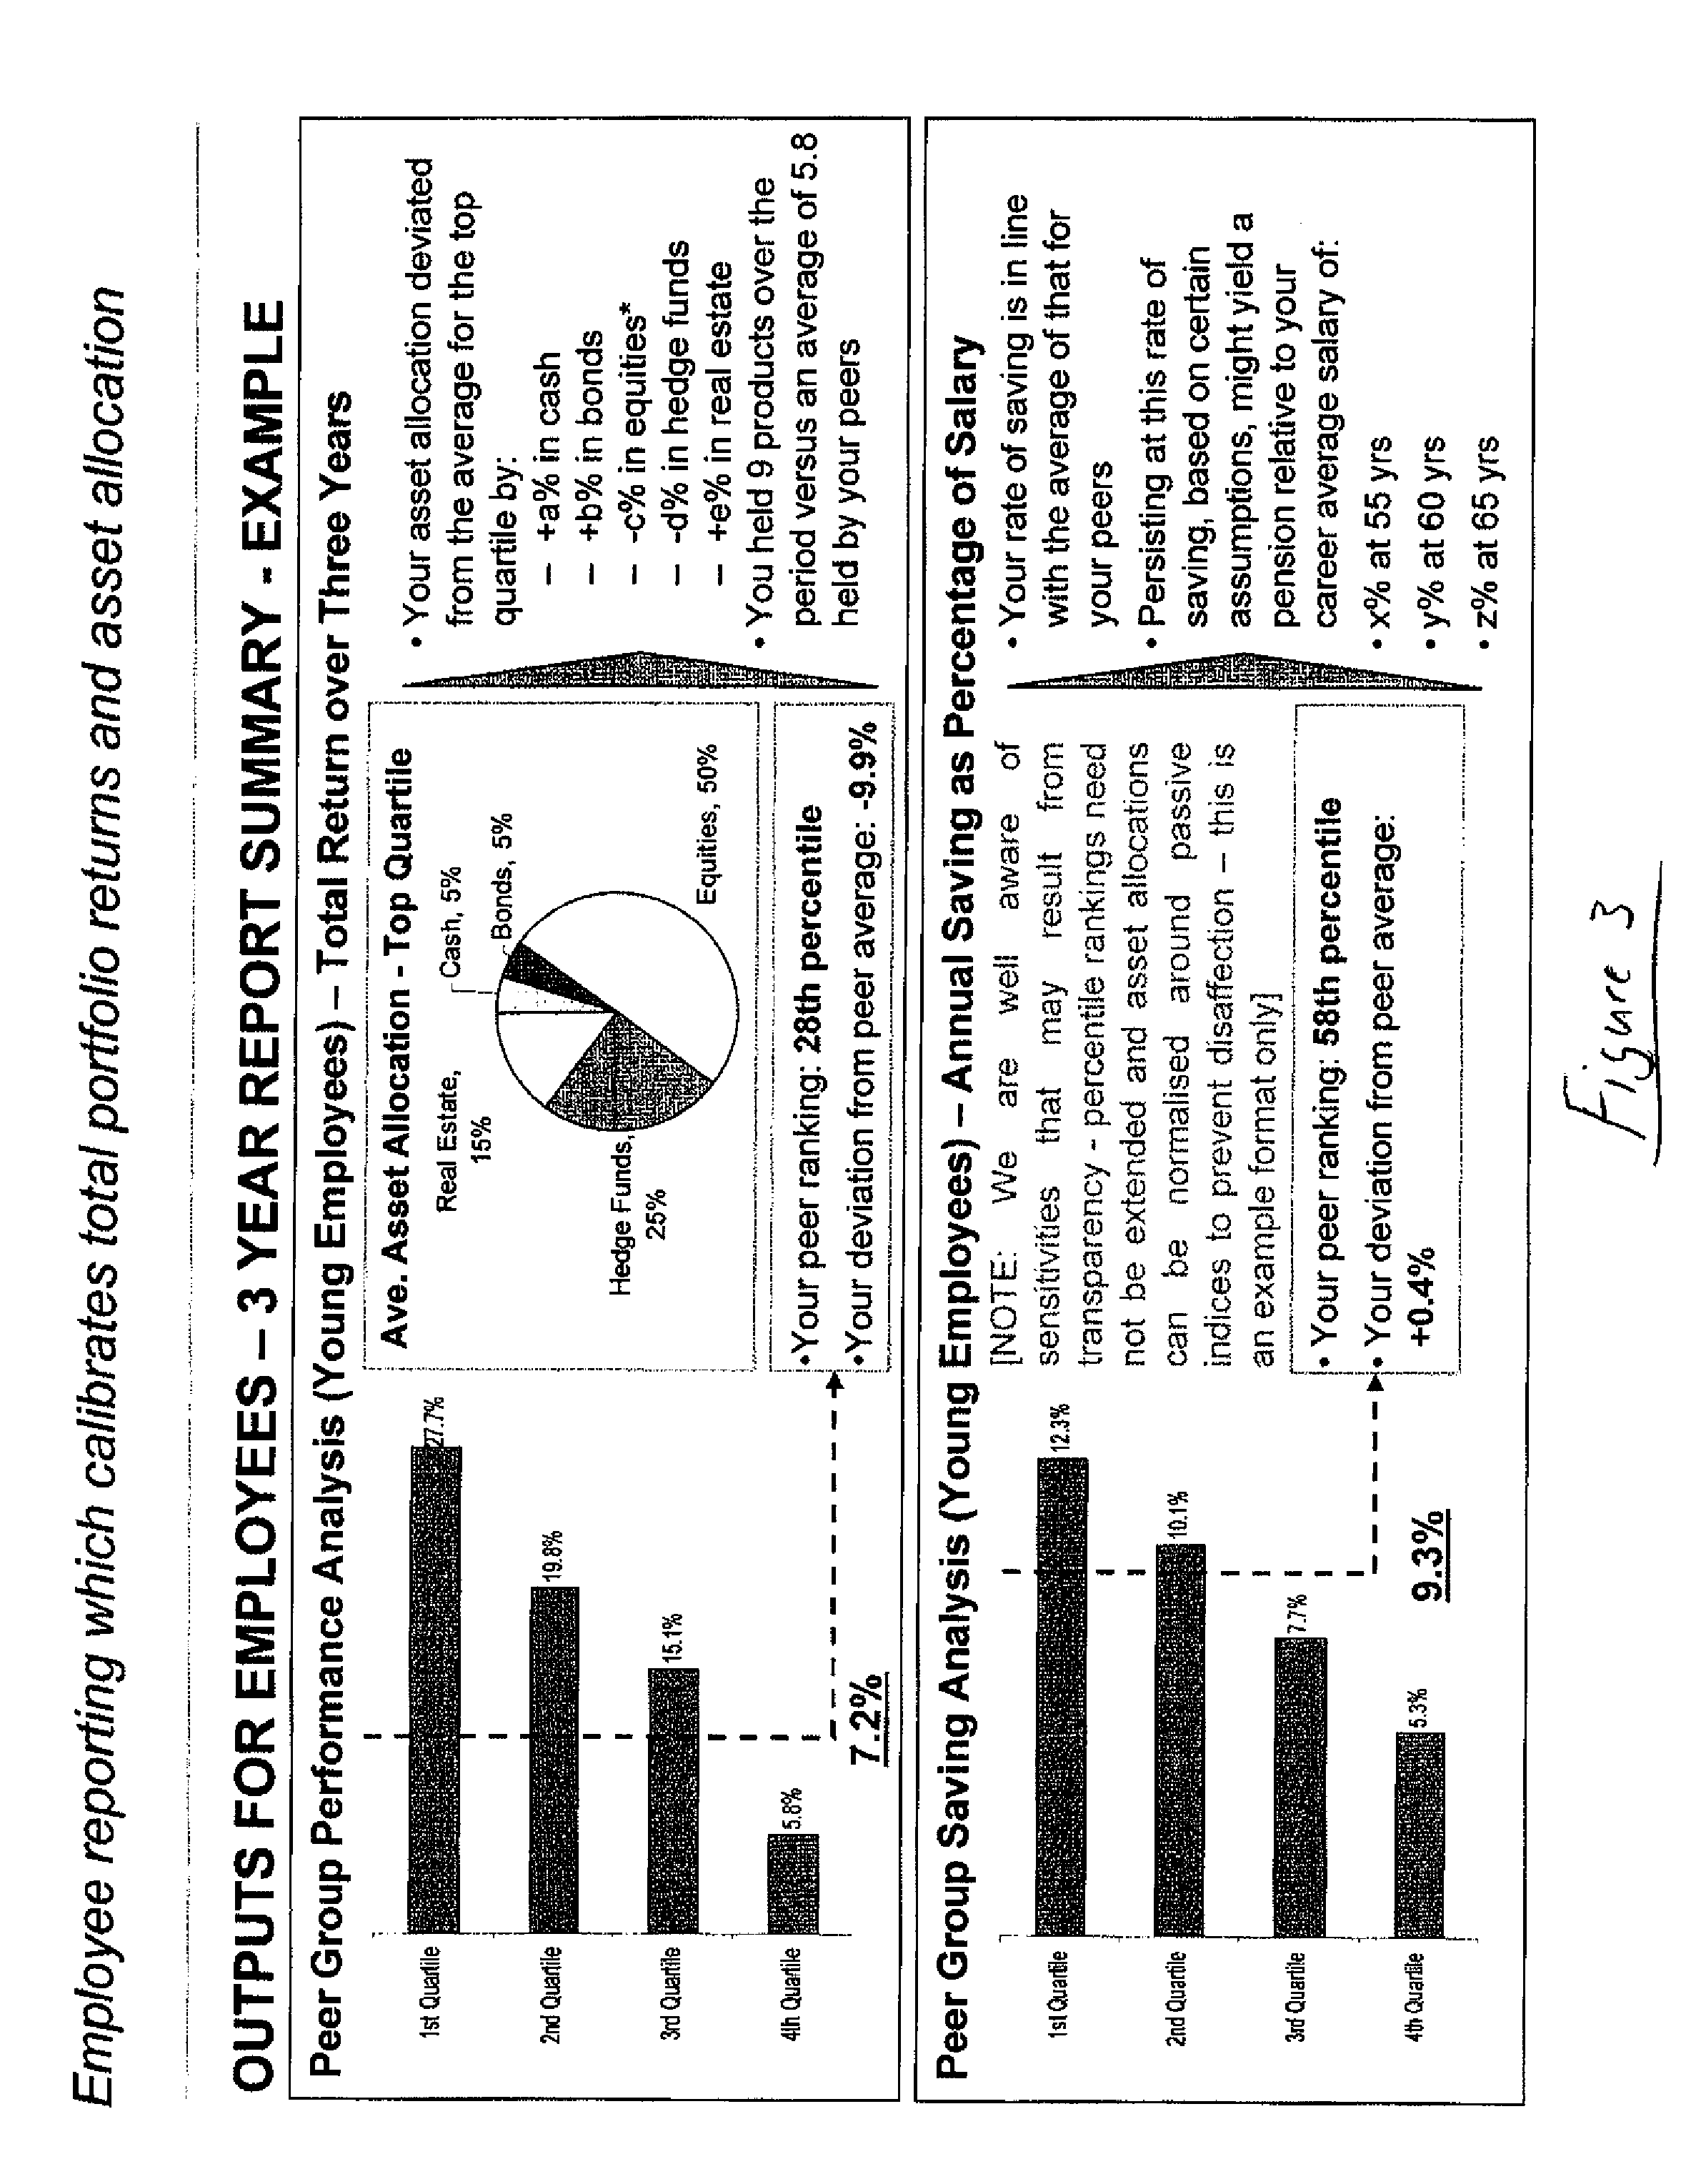 Method and system for measuring investment performance